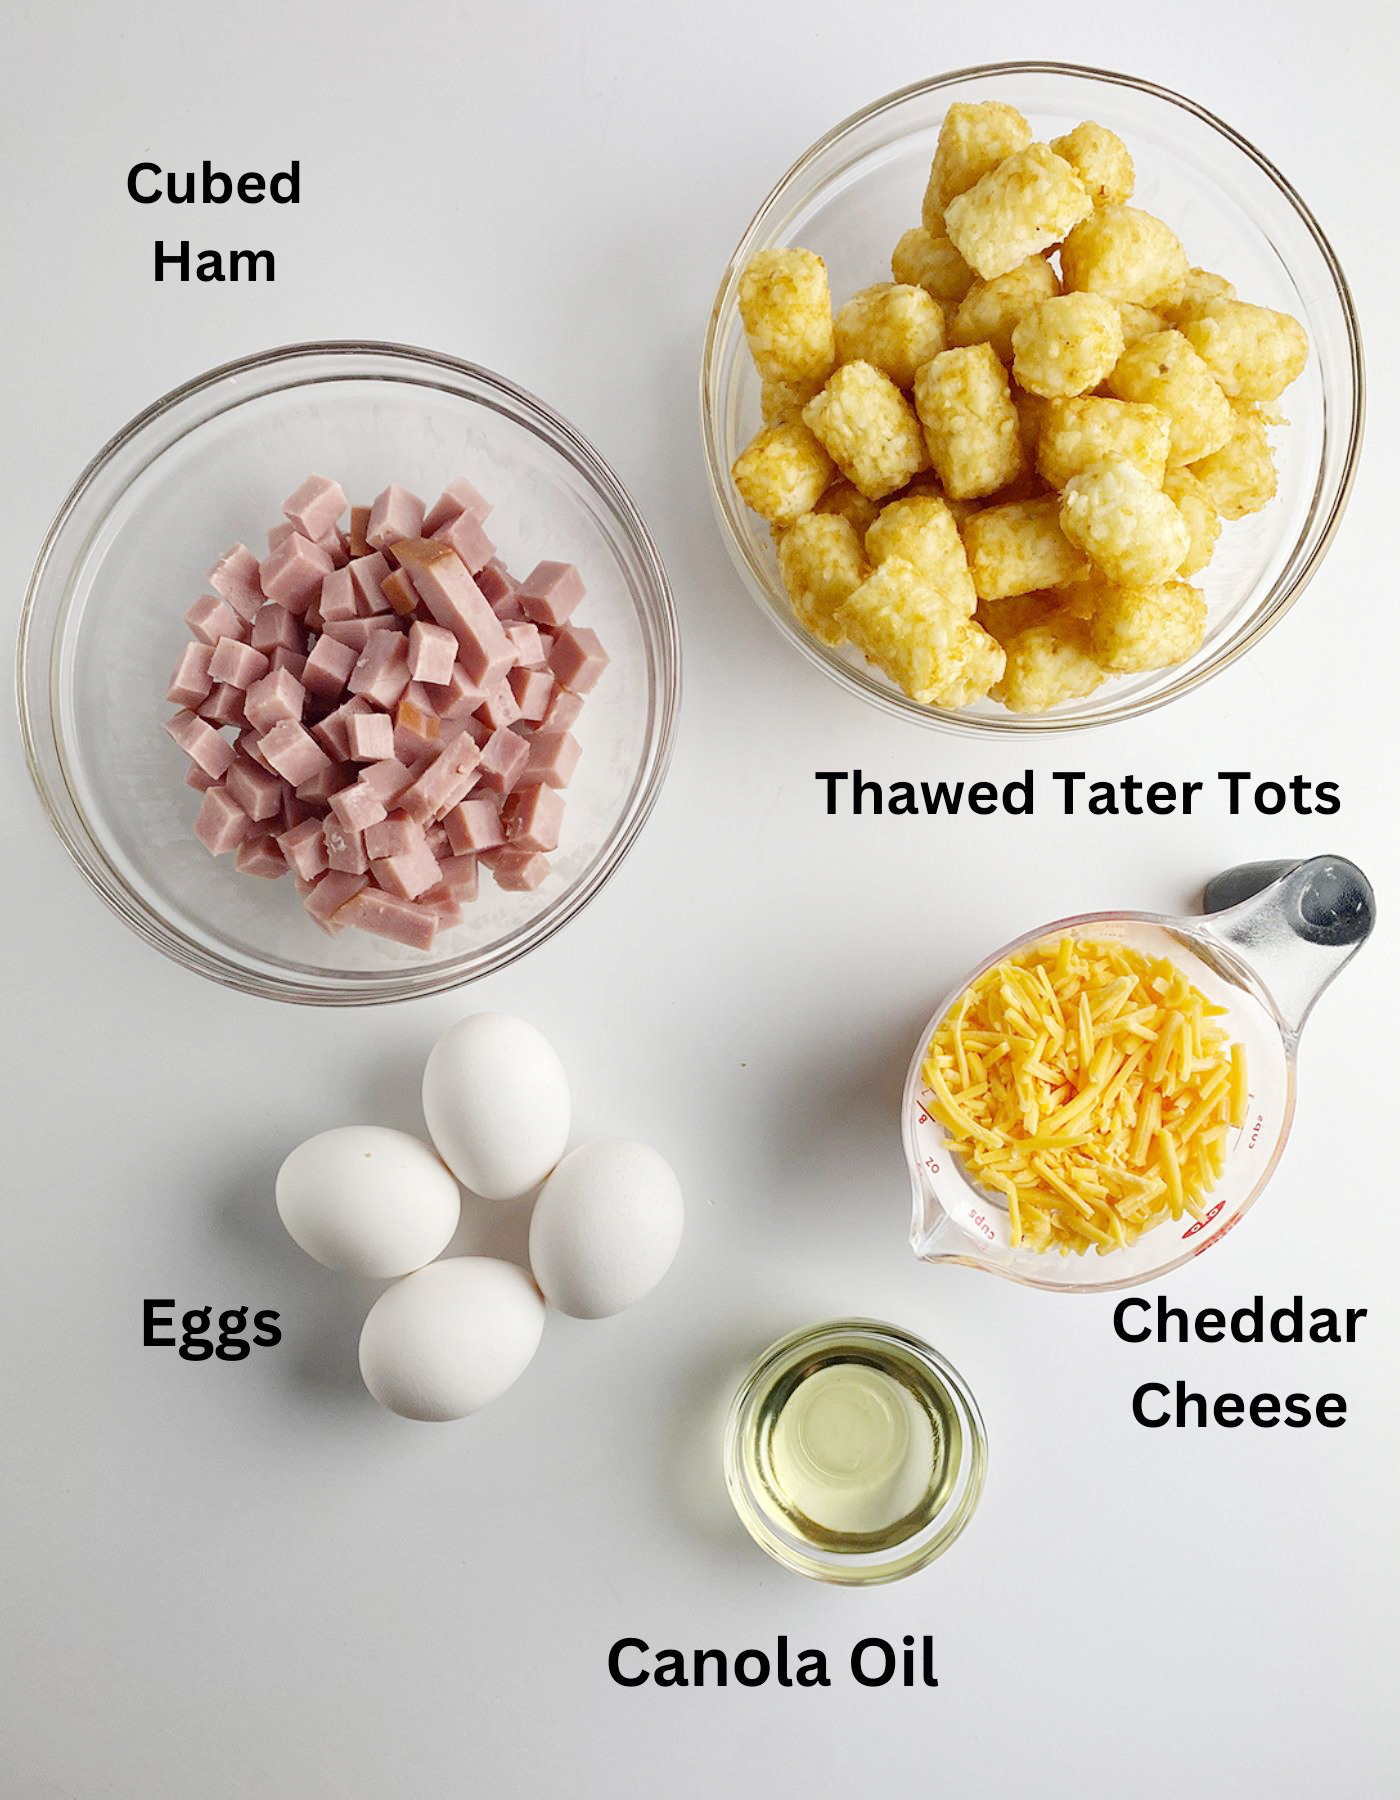 Ingredients for a ham and egg breakfast casserole.